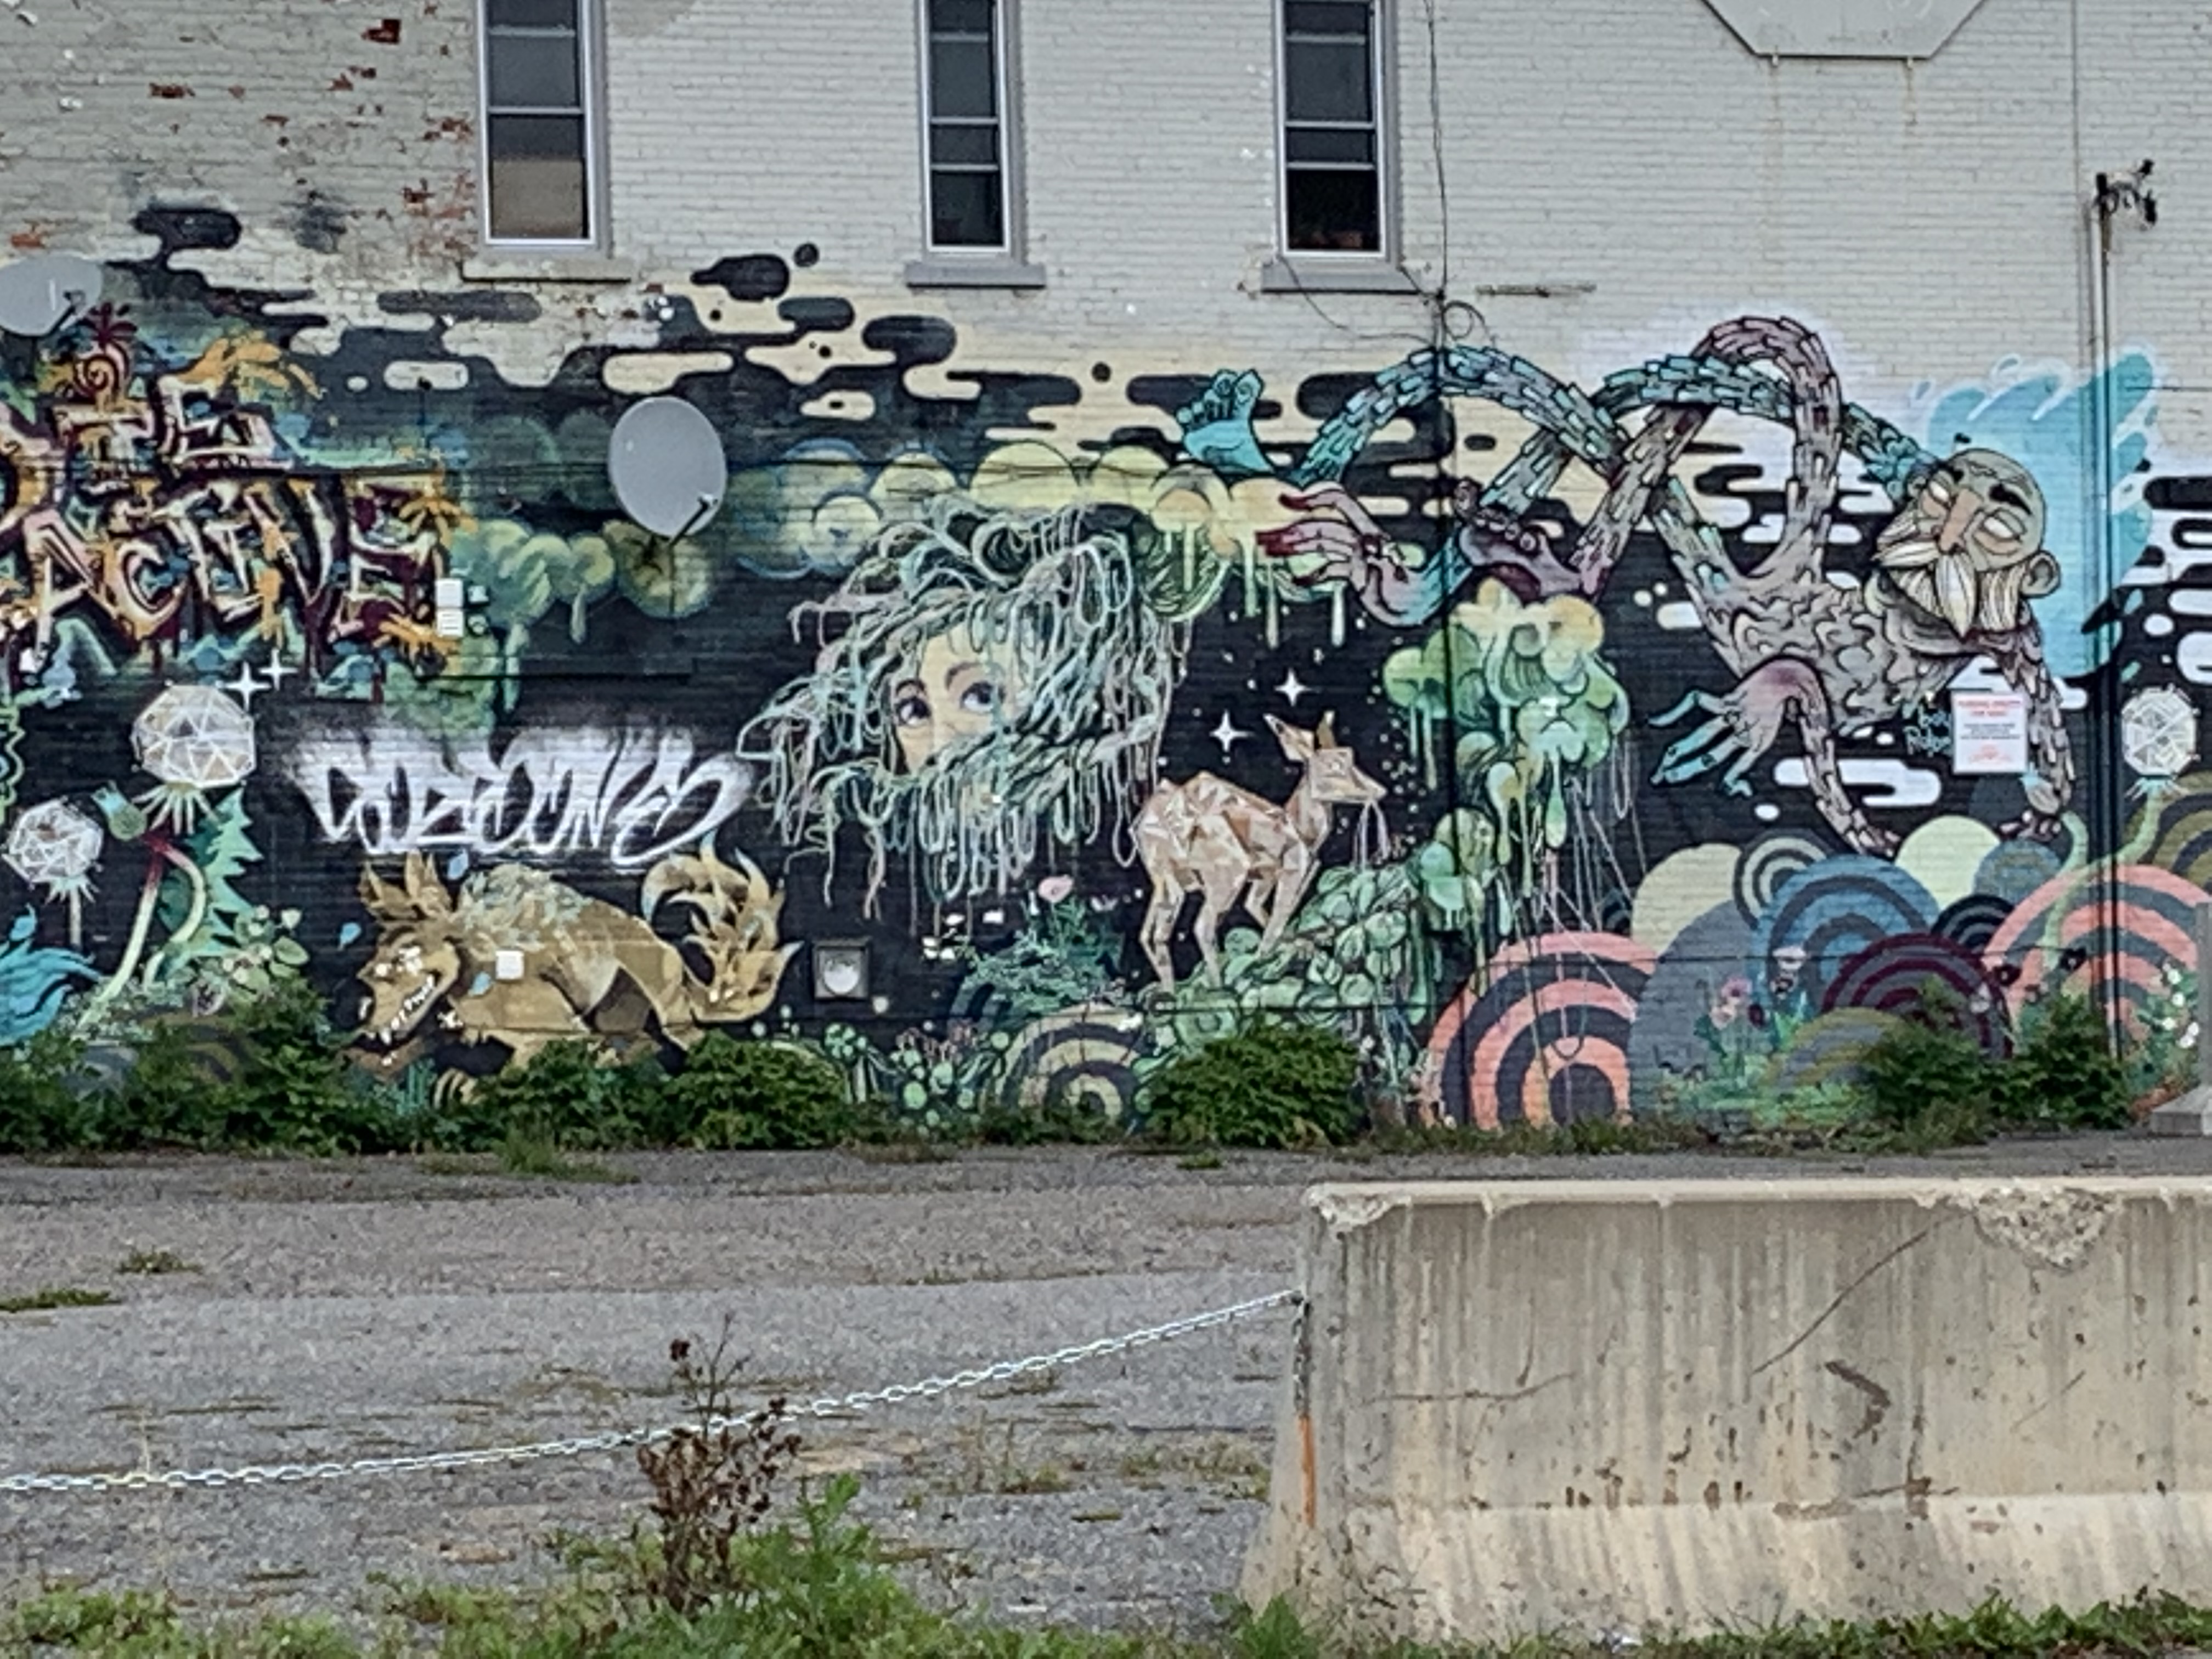 An outdoor mural featuring a dreamlike conglomeration of faces, woodland animals, graffiti tagging, and mythical plants.